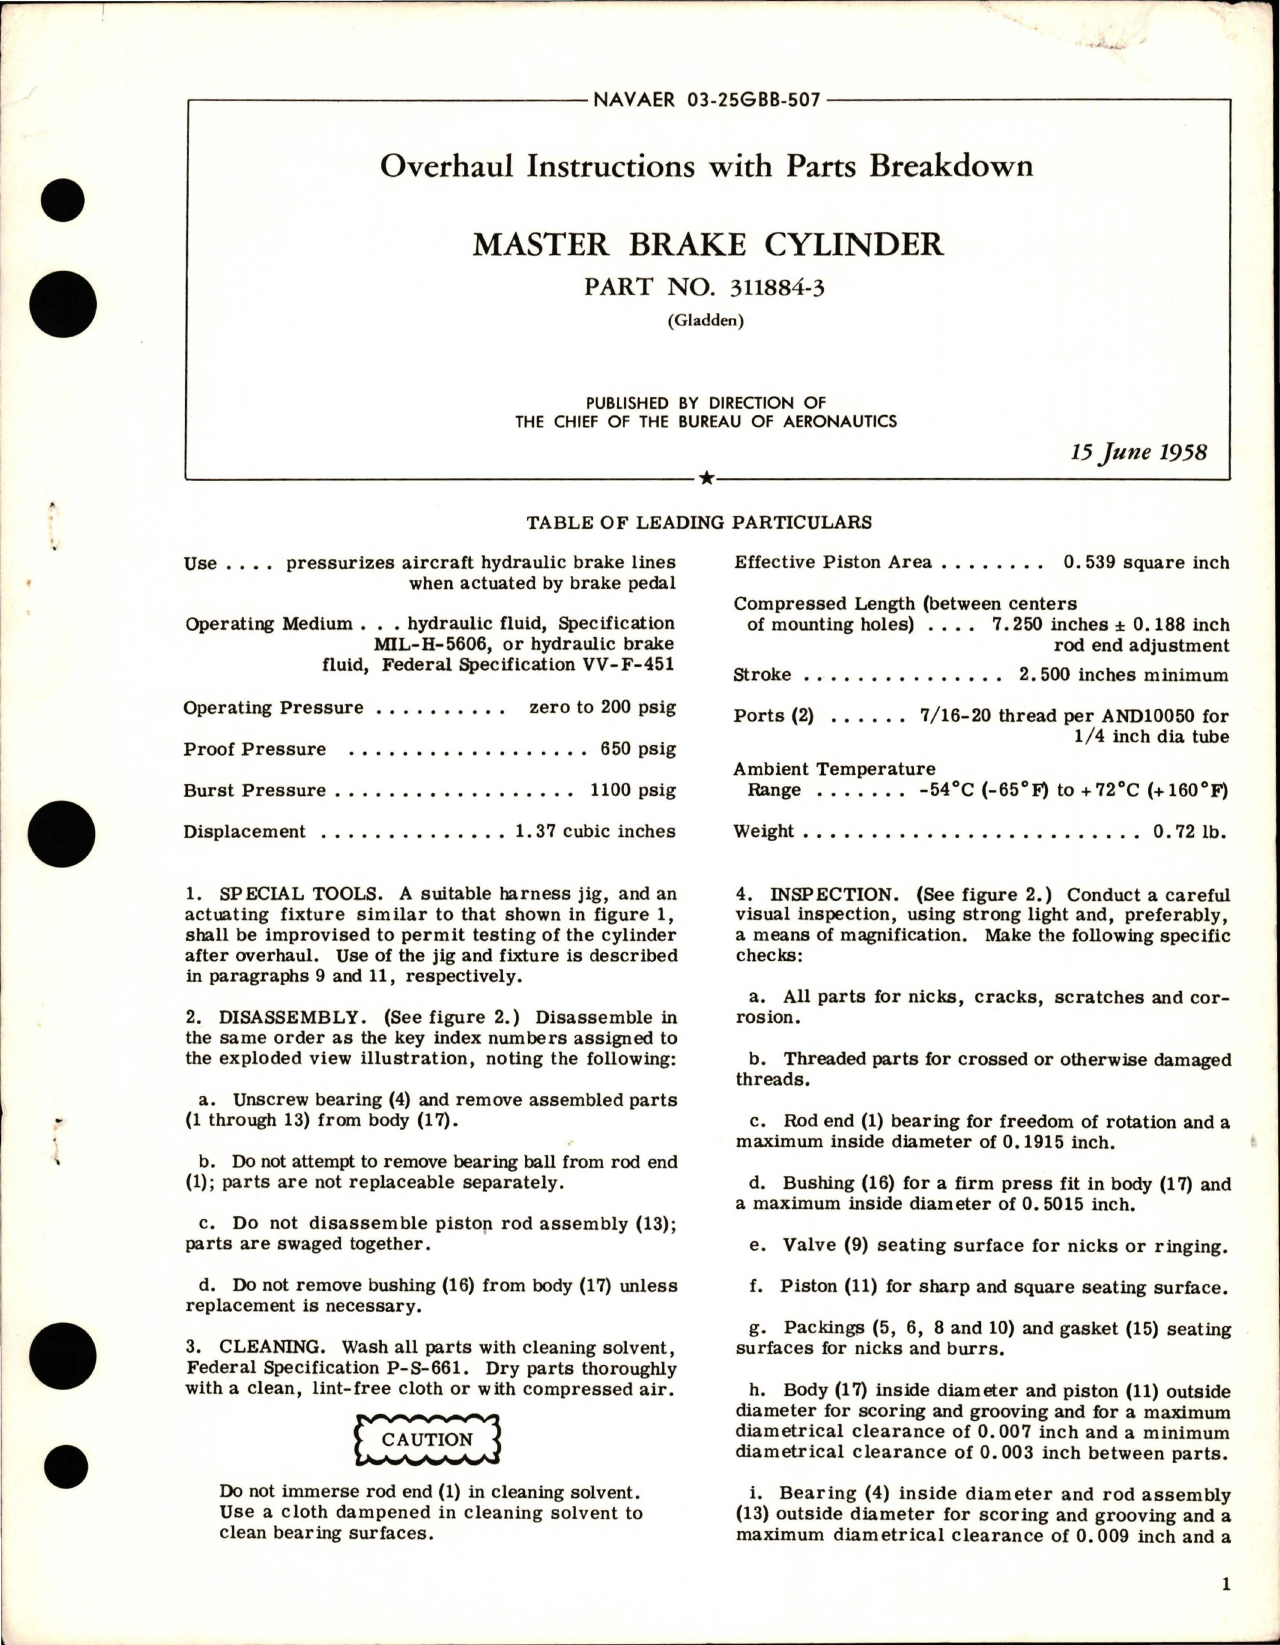 Sample page 1 from AirCorps Library document: Overhaul Instructions with Parts Breakdown for Master Brake Cylinder - Part 311884-3